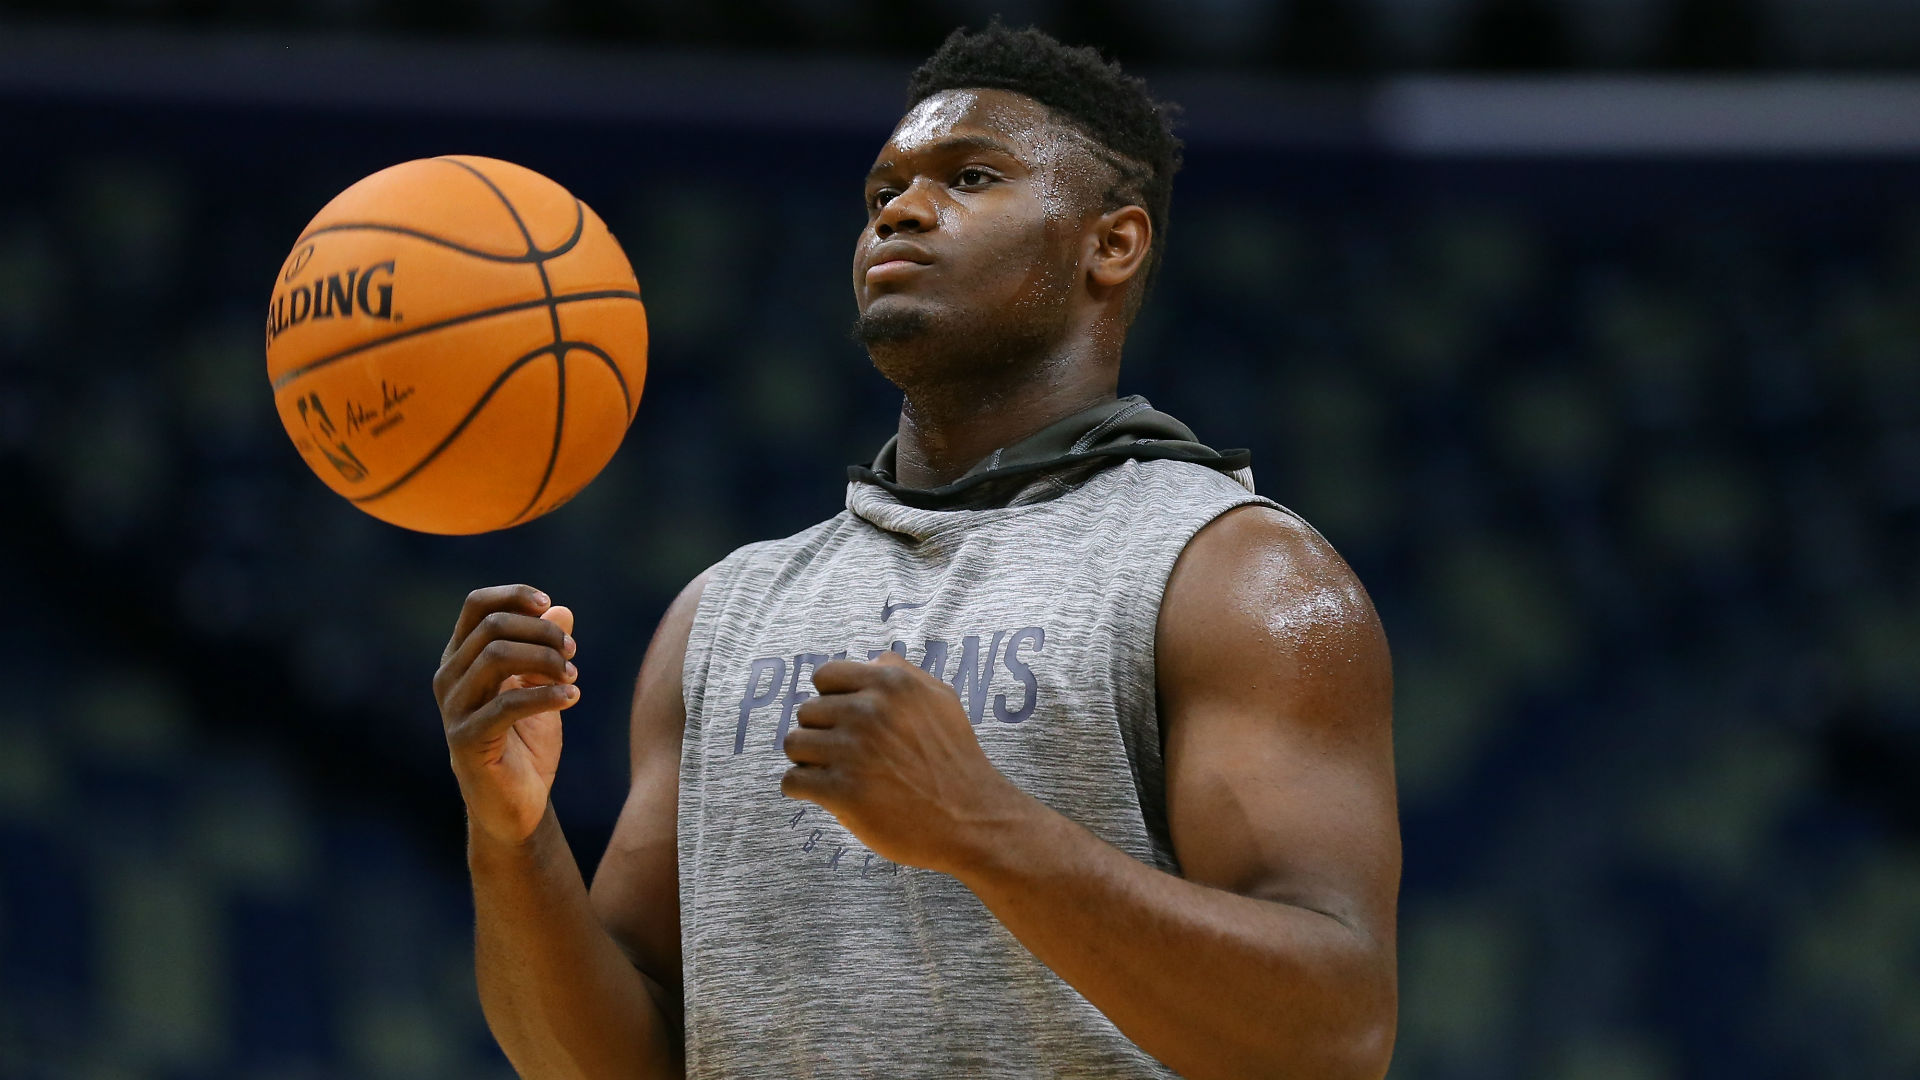 Zion Williamson, the number one overall draft pick, is reportedly set to miss the start of the NBA regular season due to a knee injury.